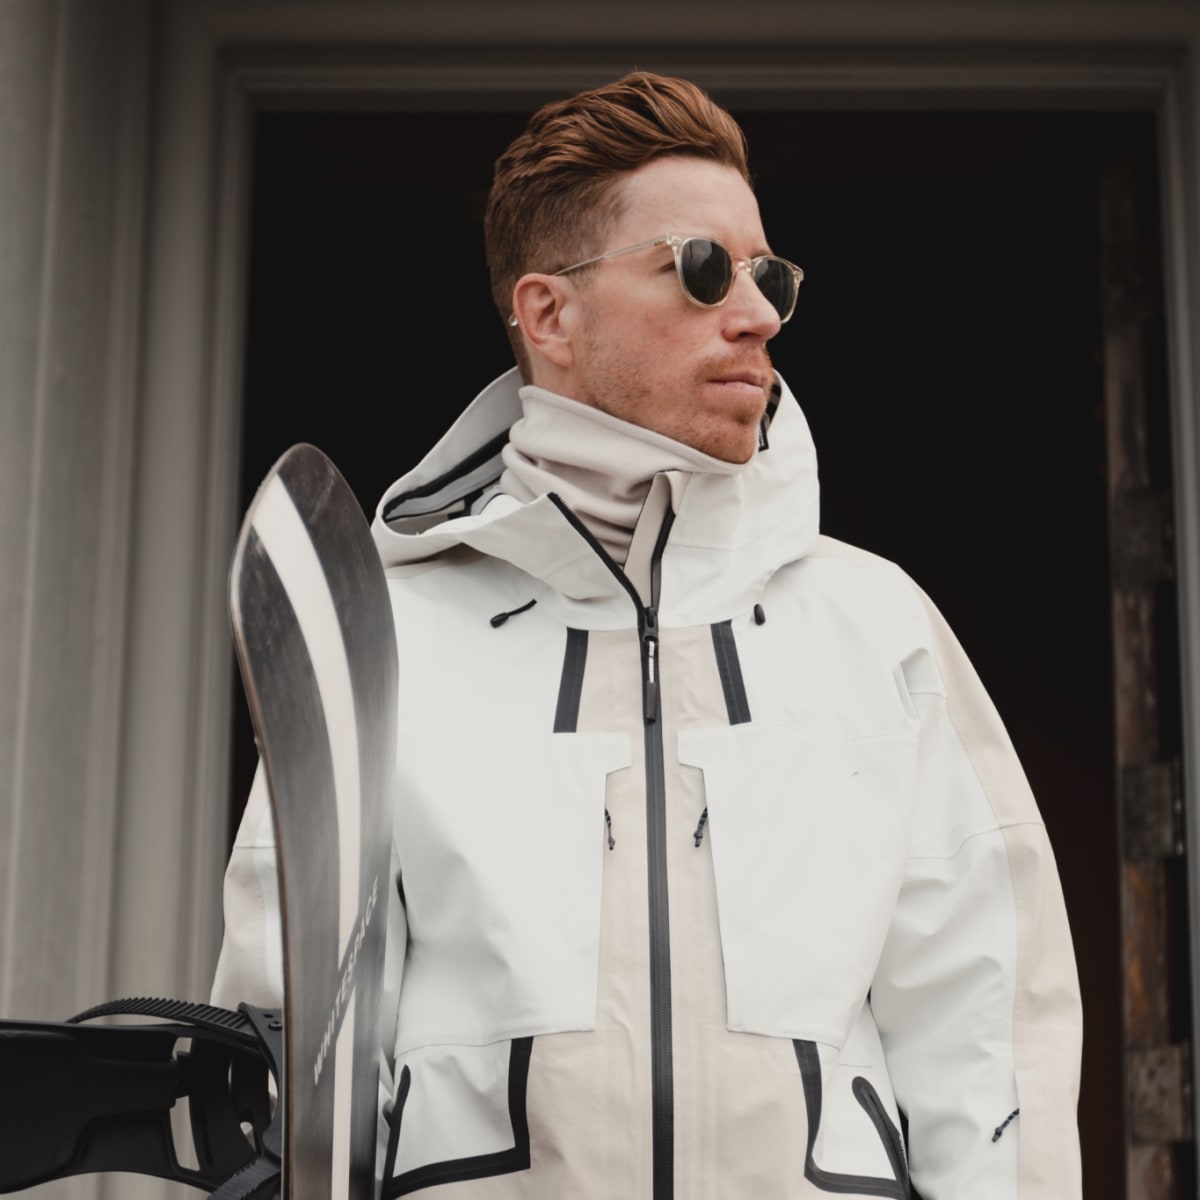 Snowboarder Shaun White Withdraws From Slopestyle Event : The Edge : NPR